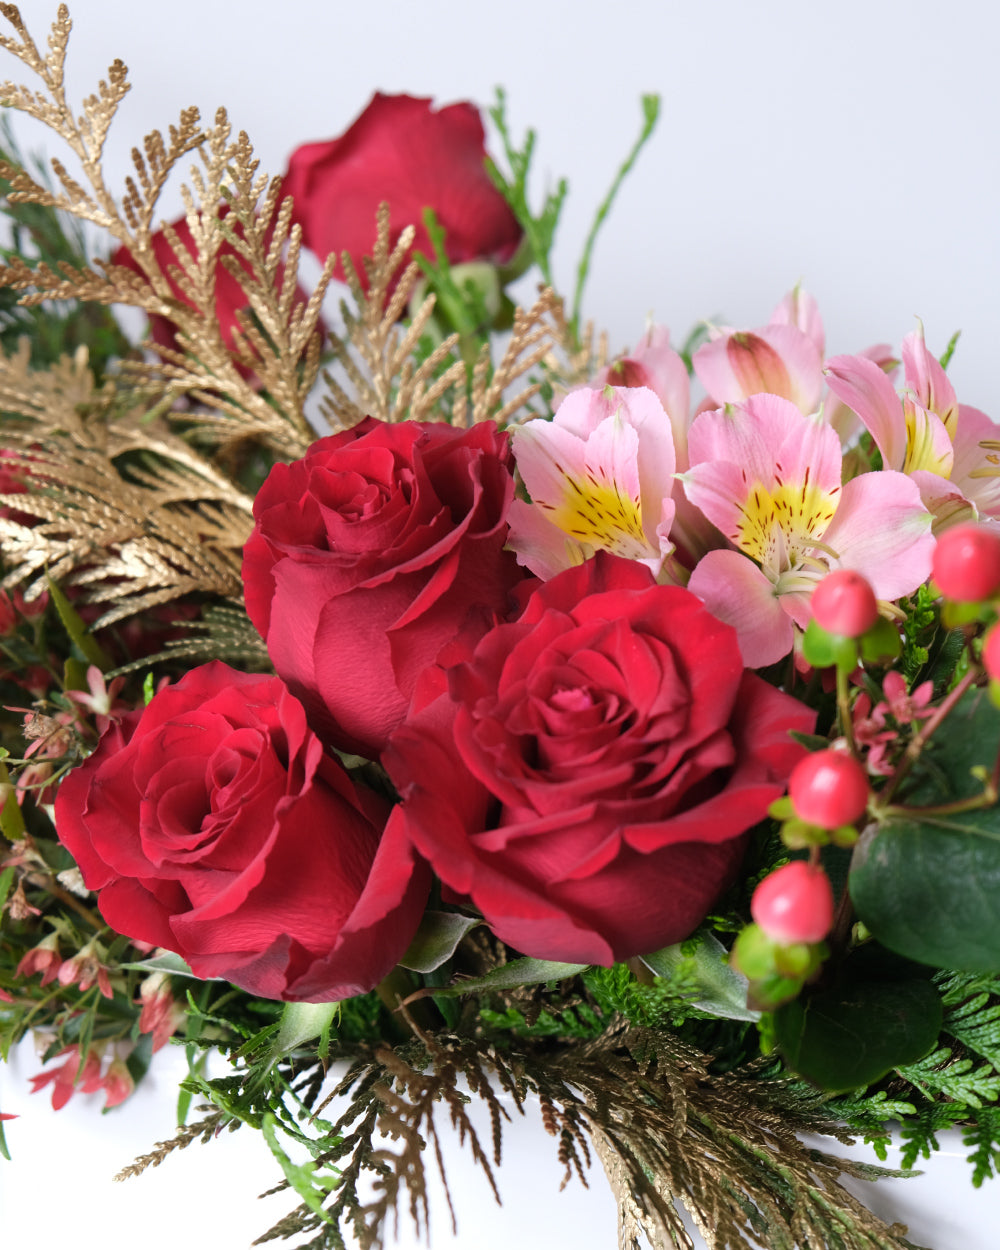 Christmas Table Flowers (Red & Gold)